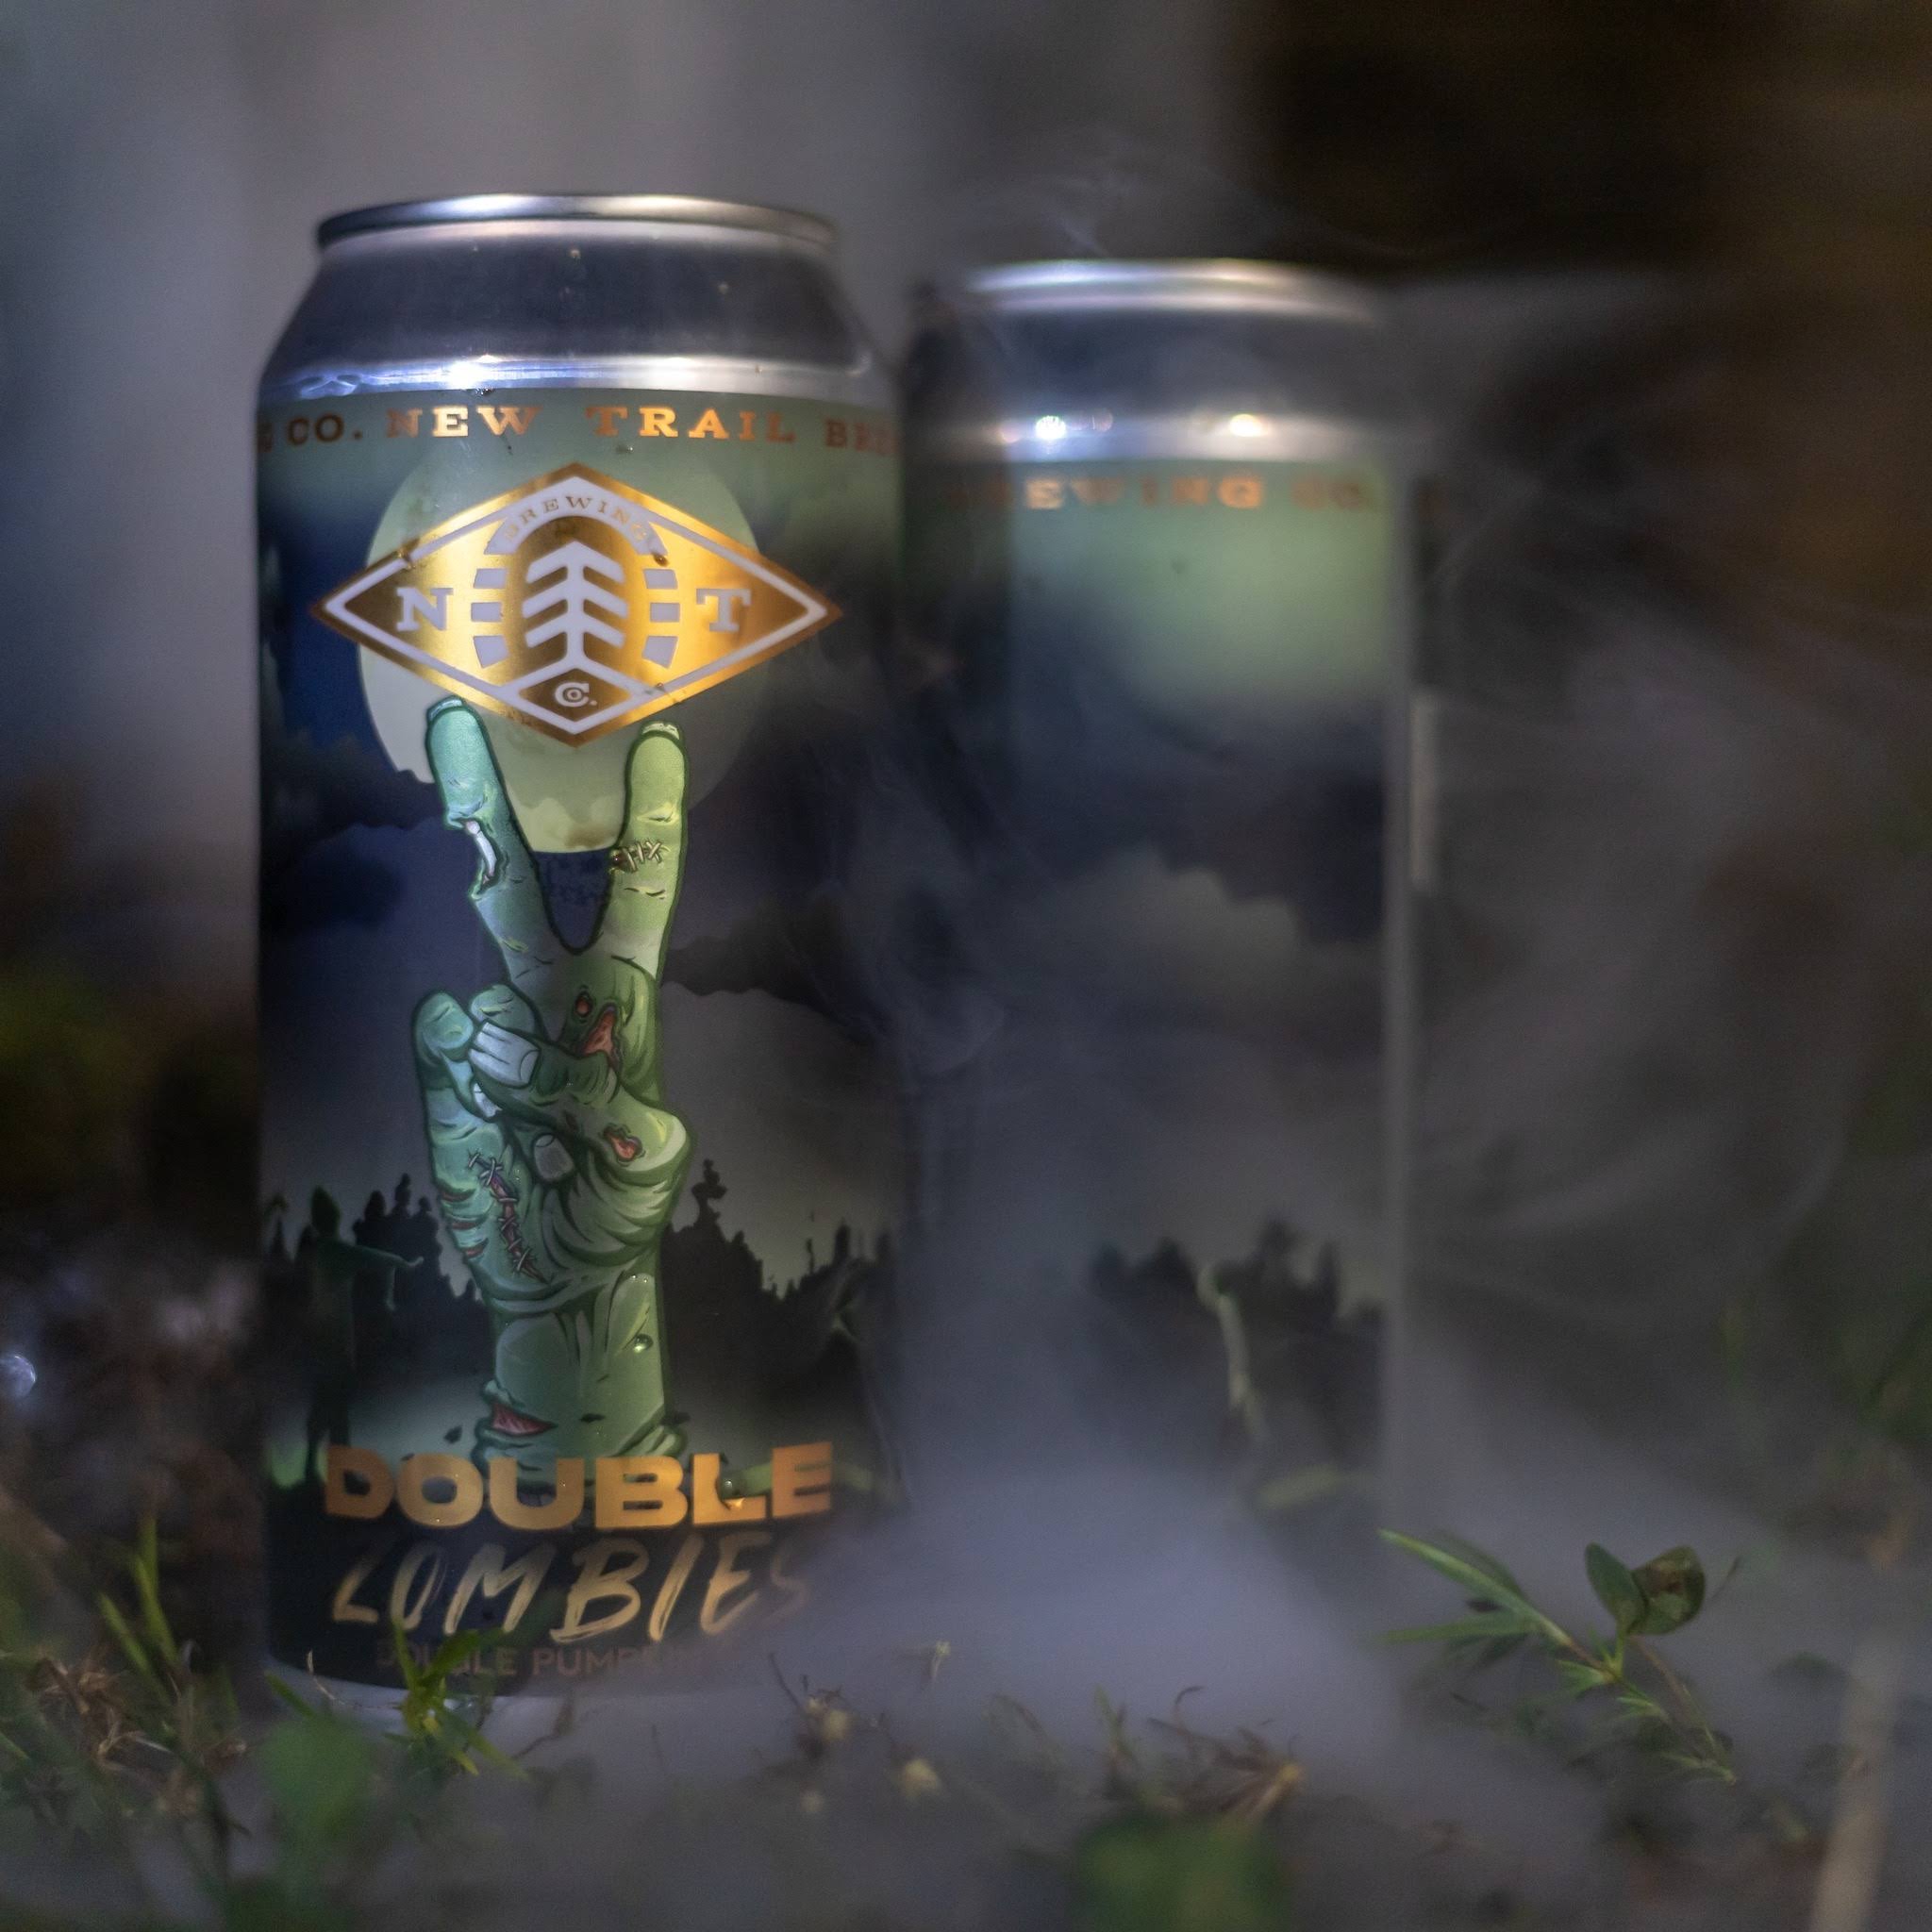 New Trail Double Zombies (4 Pack - 16oz cans)